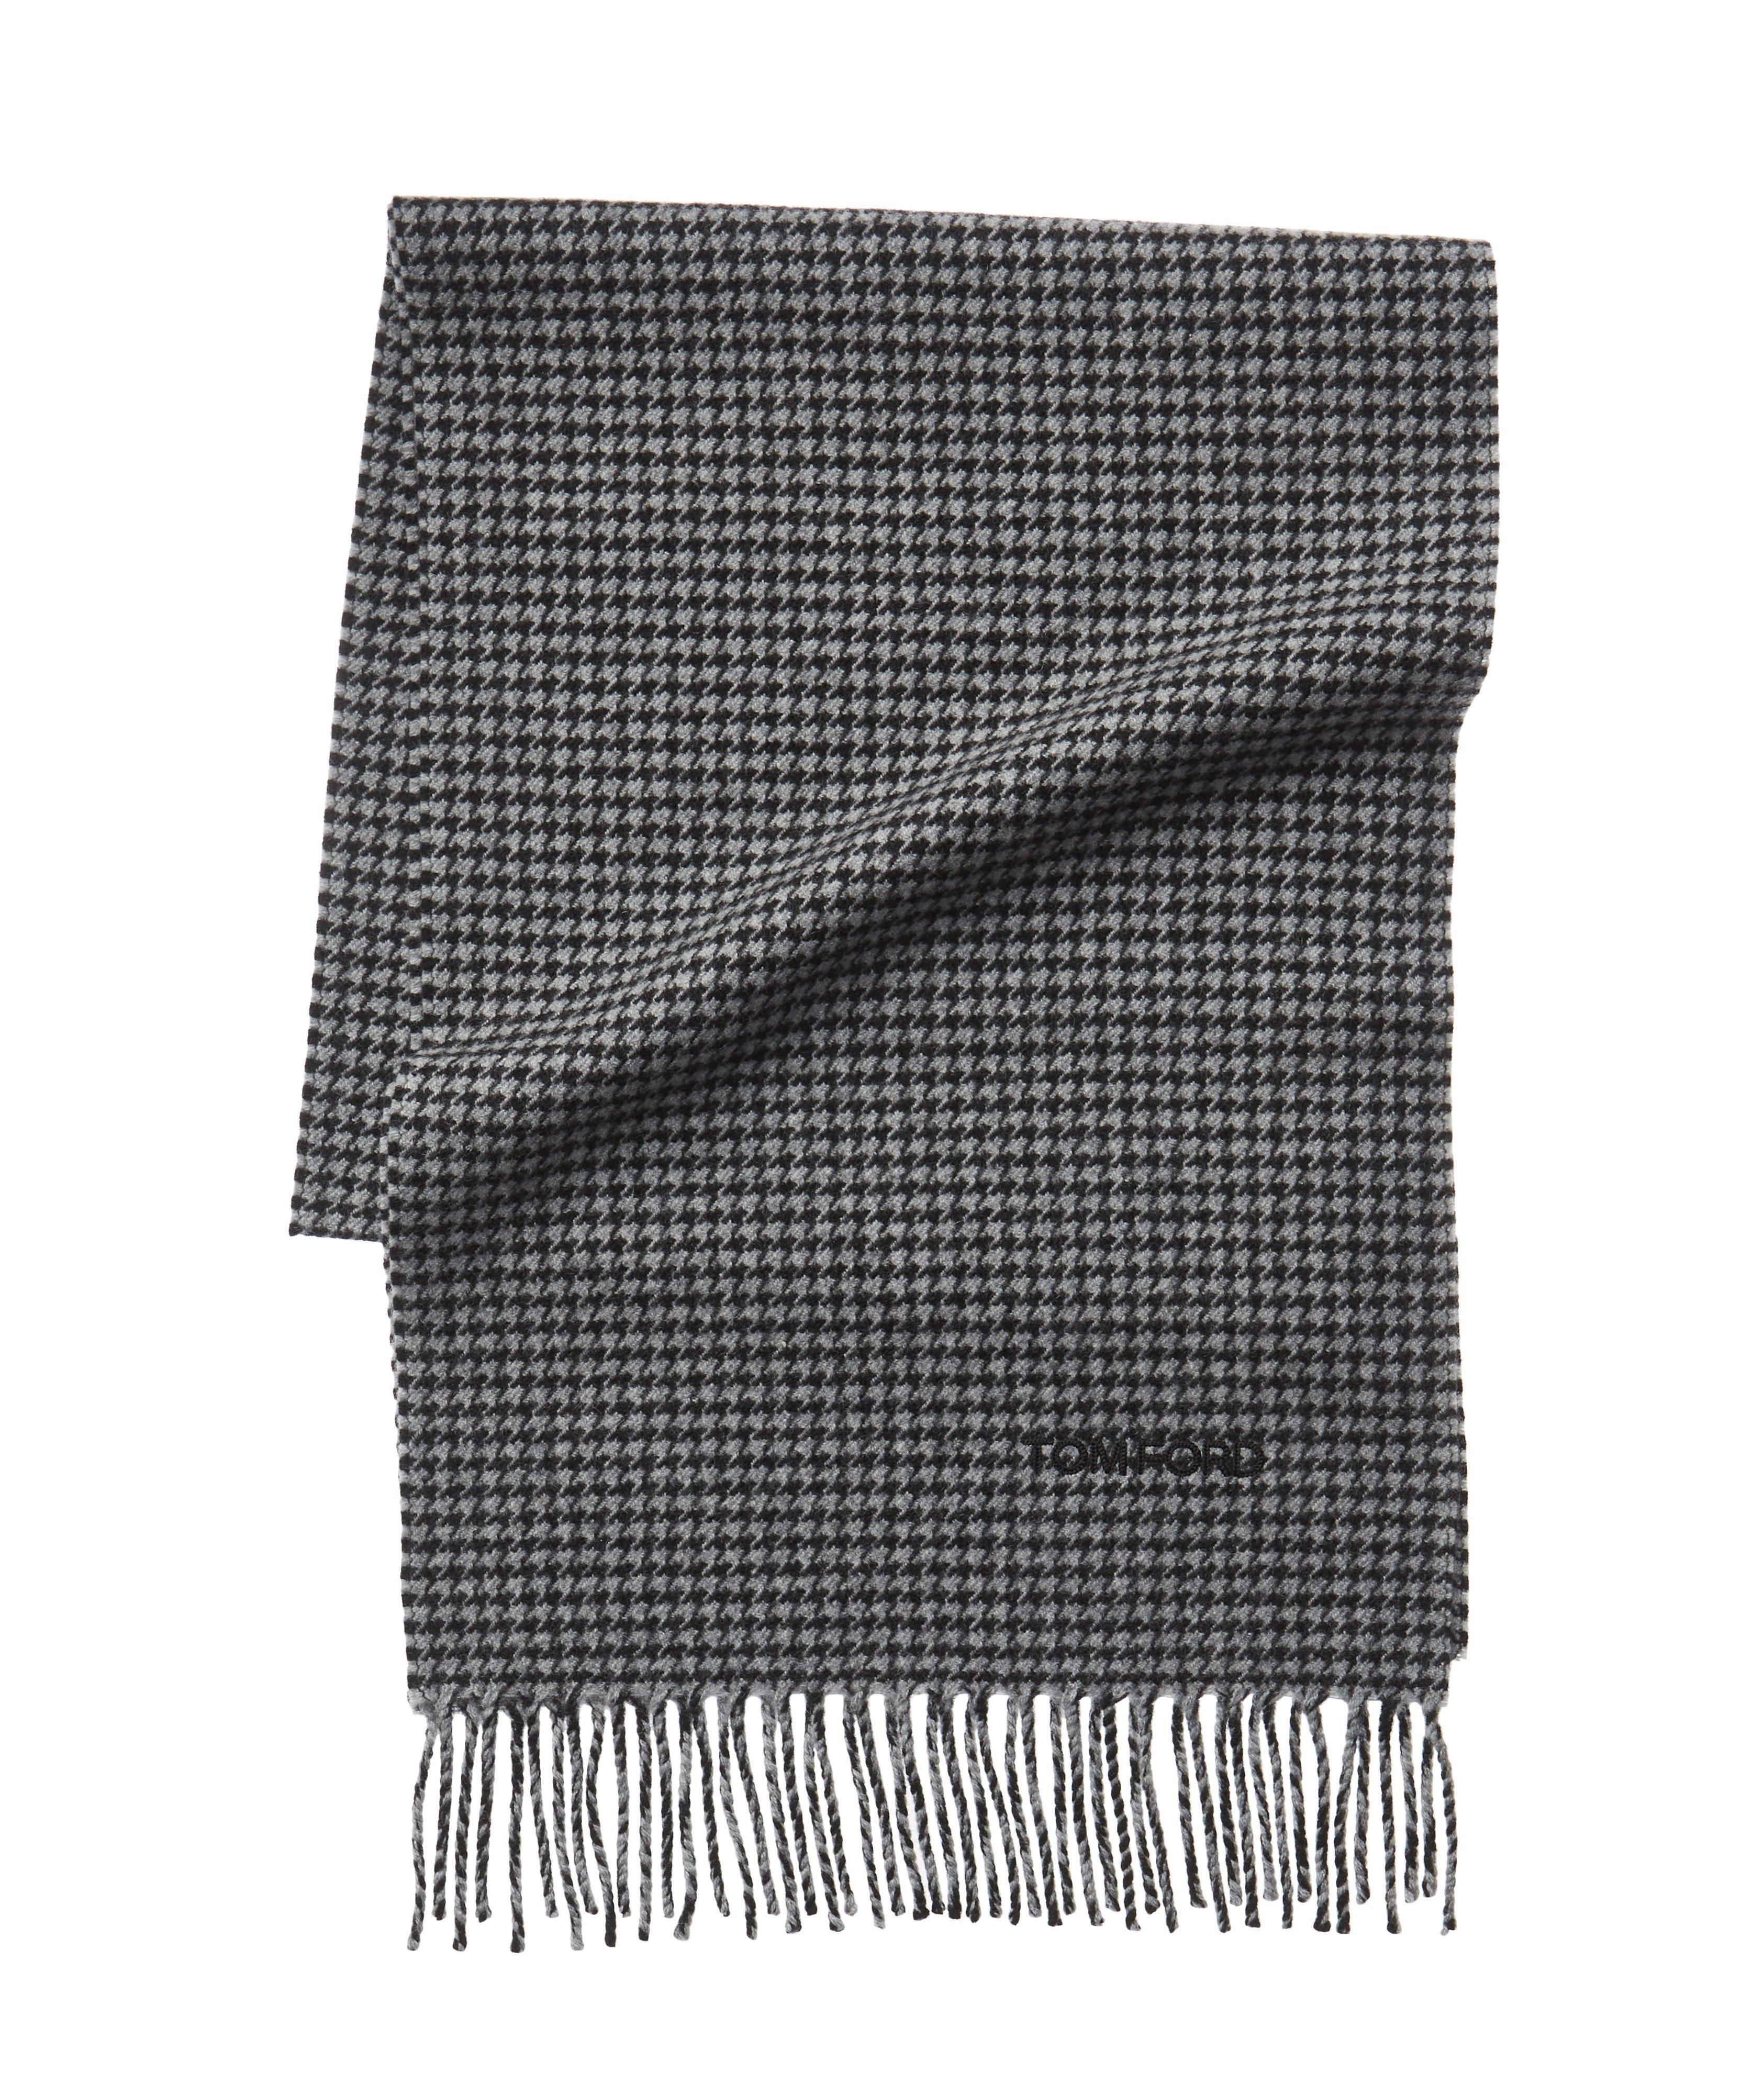 Houndstooth Print Wool-Cashmere Scarf image 0